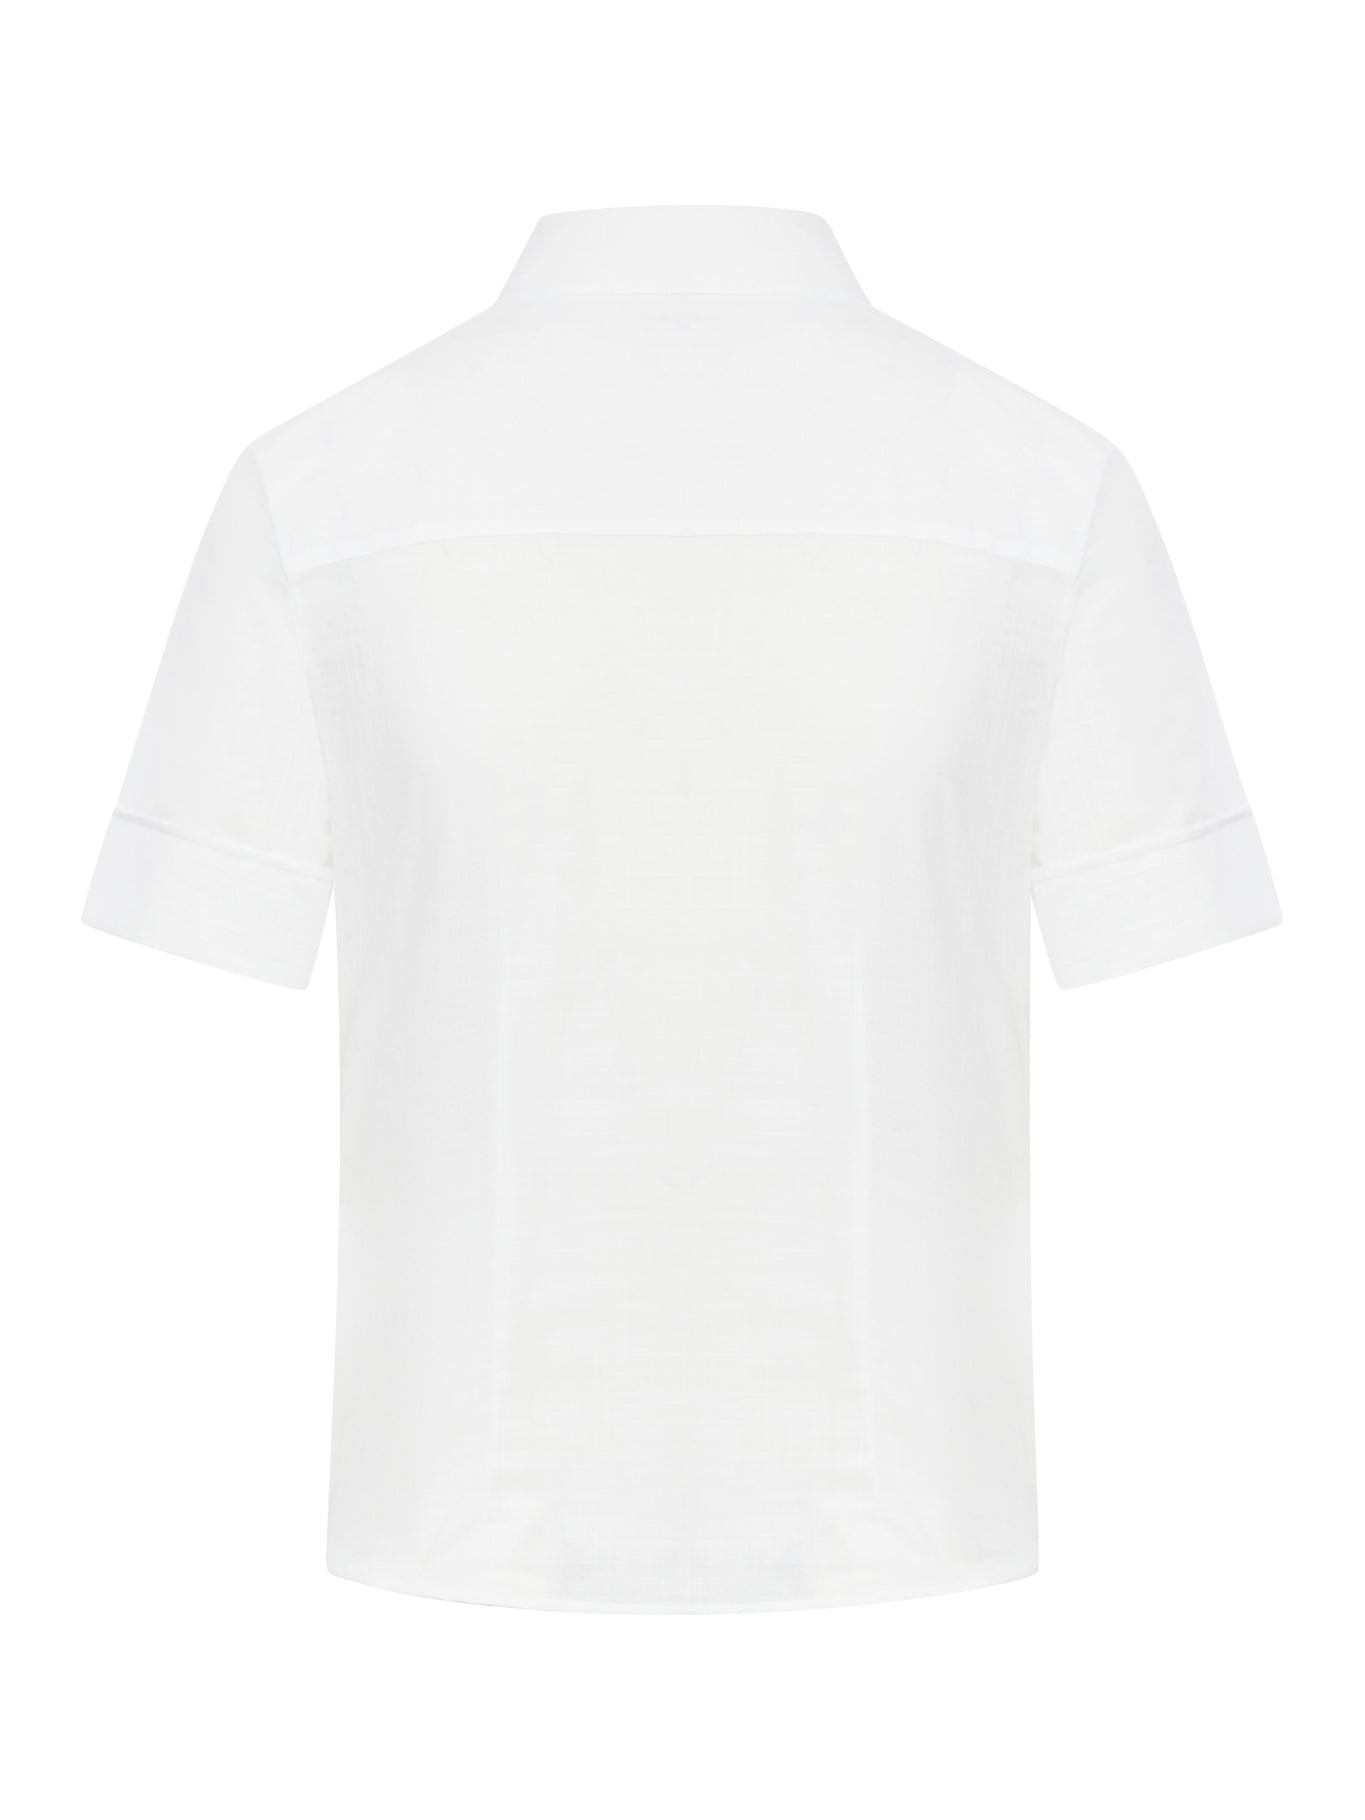 CHELSEA SHIRT IN WHITE COTTON FLAT